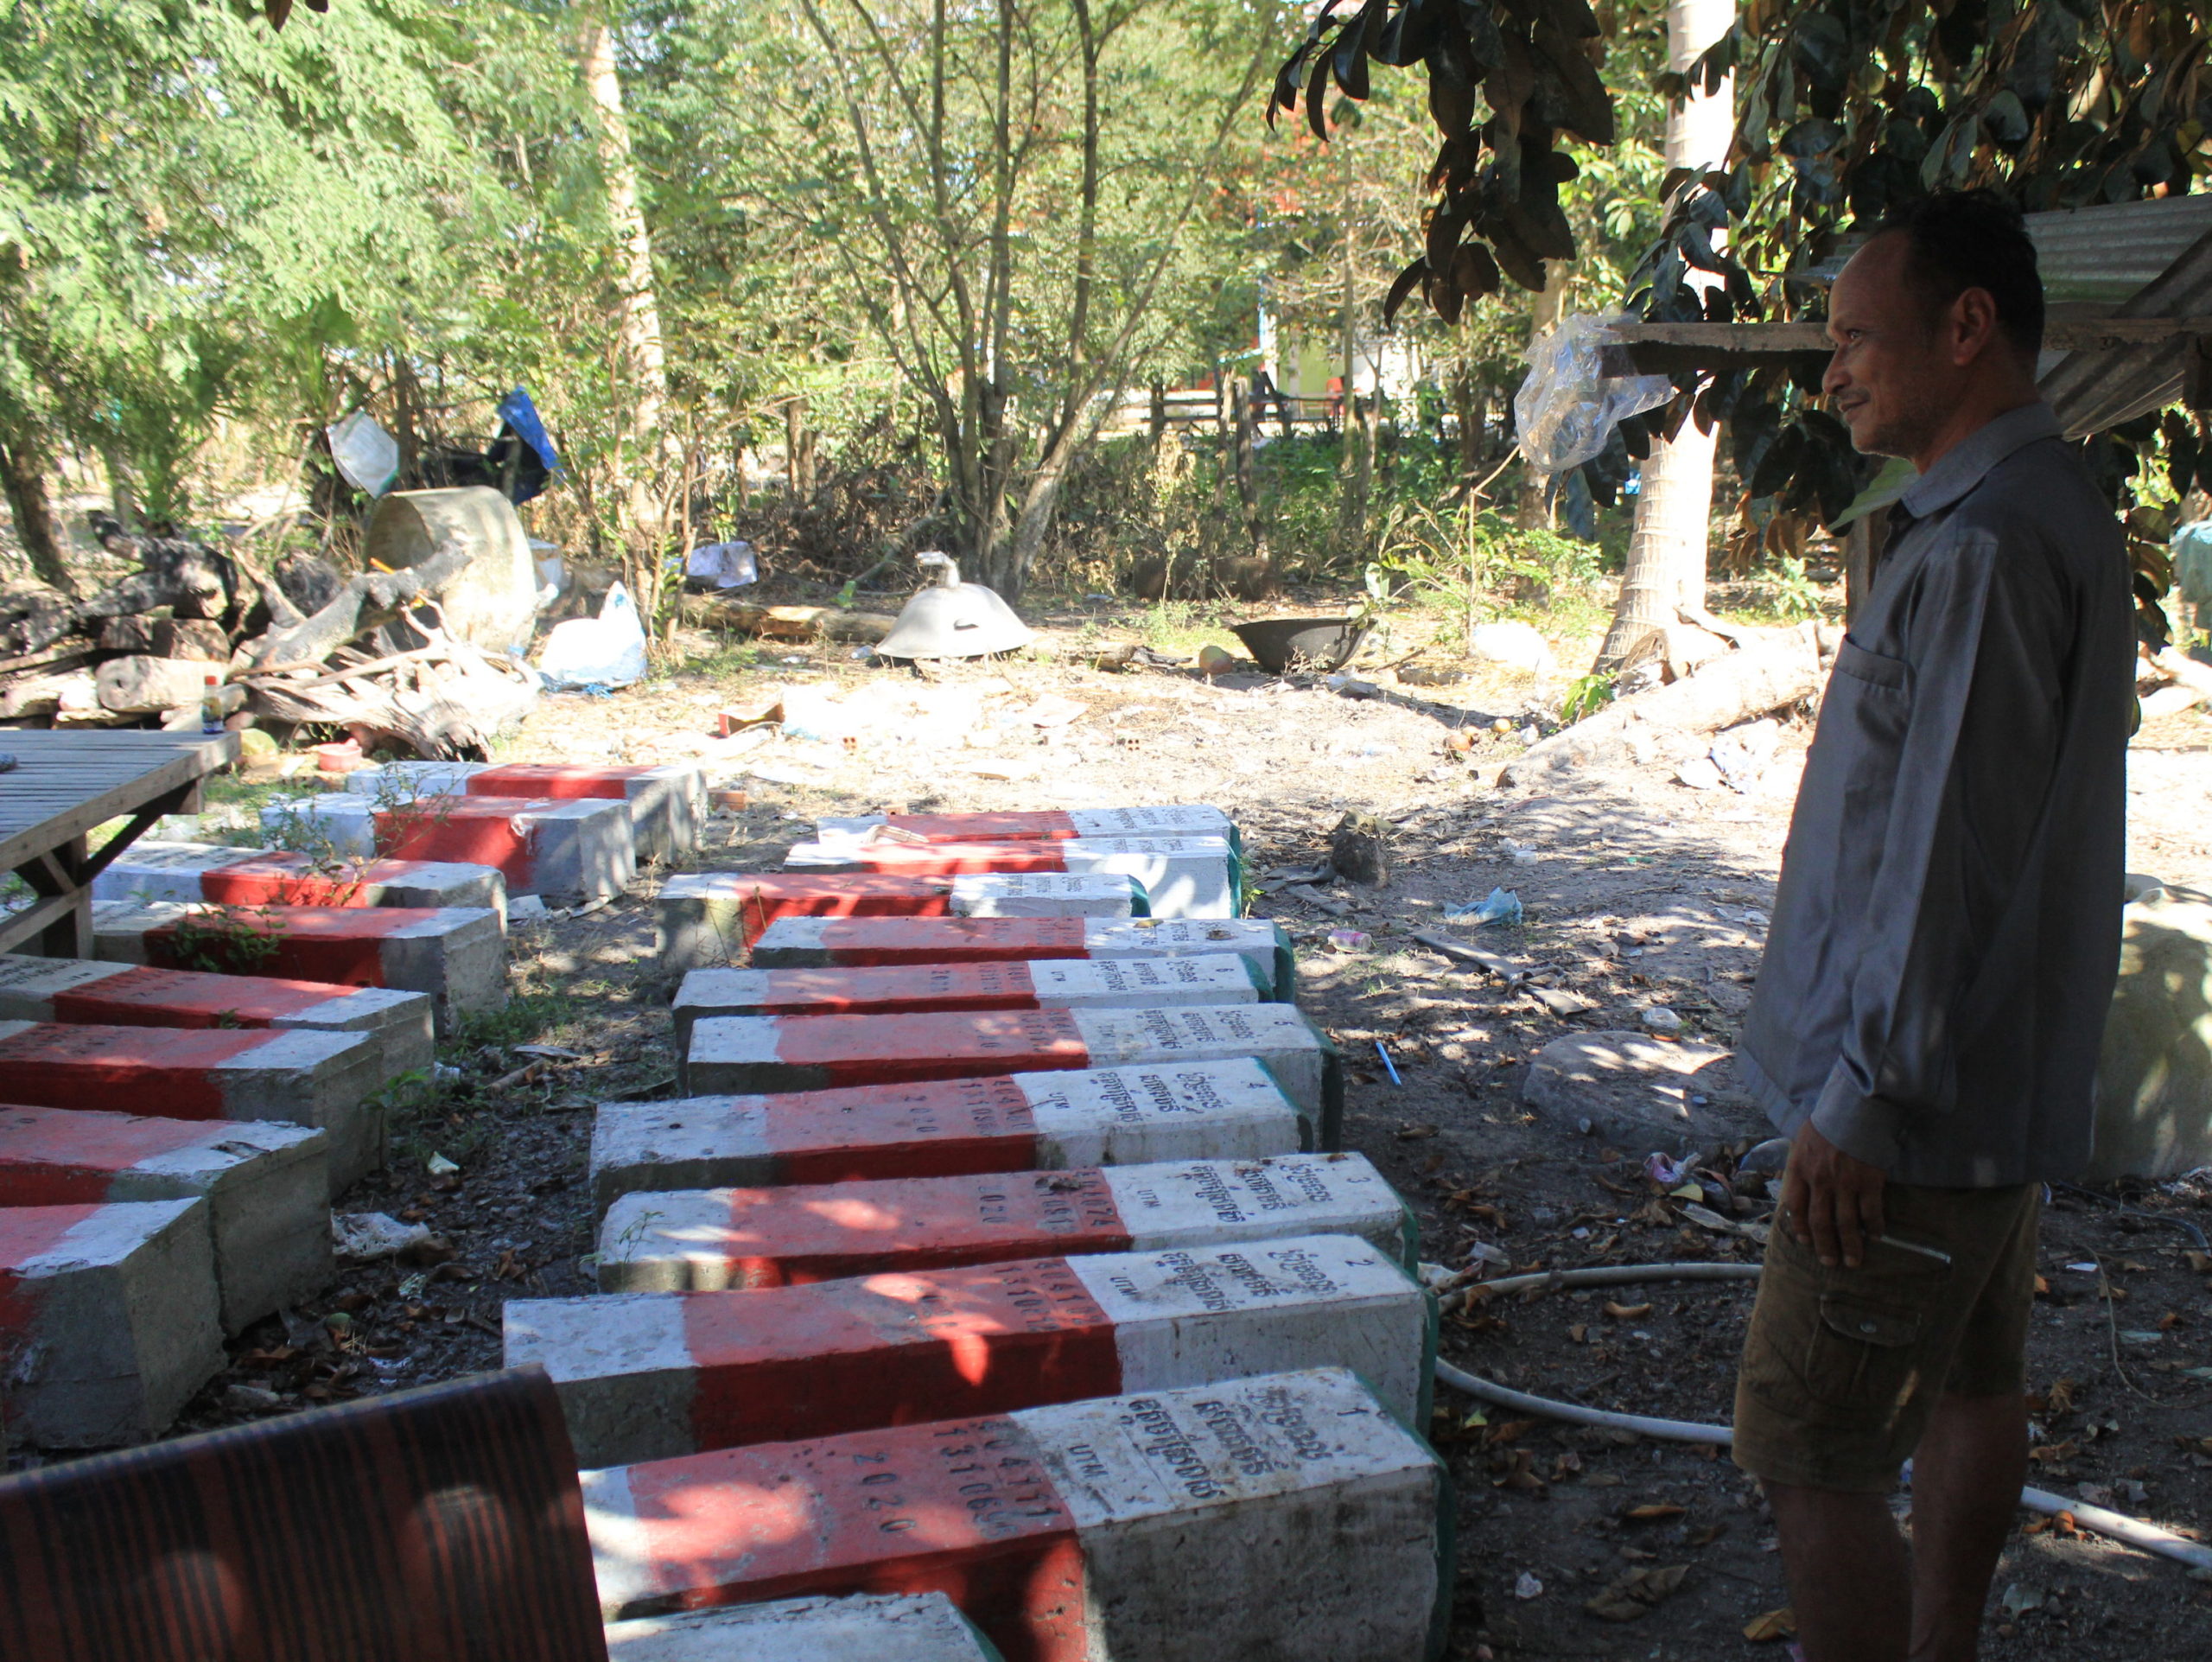 Pou Meas villager Chhuon Khoeun stands before concrete posts he says were made to demarcate the local community forest as part of its formalization with environmental officials. That process ground to an unexplained halt in 2020, villagers say. (Andrew Haffner/VOD)